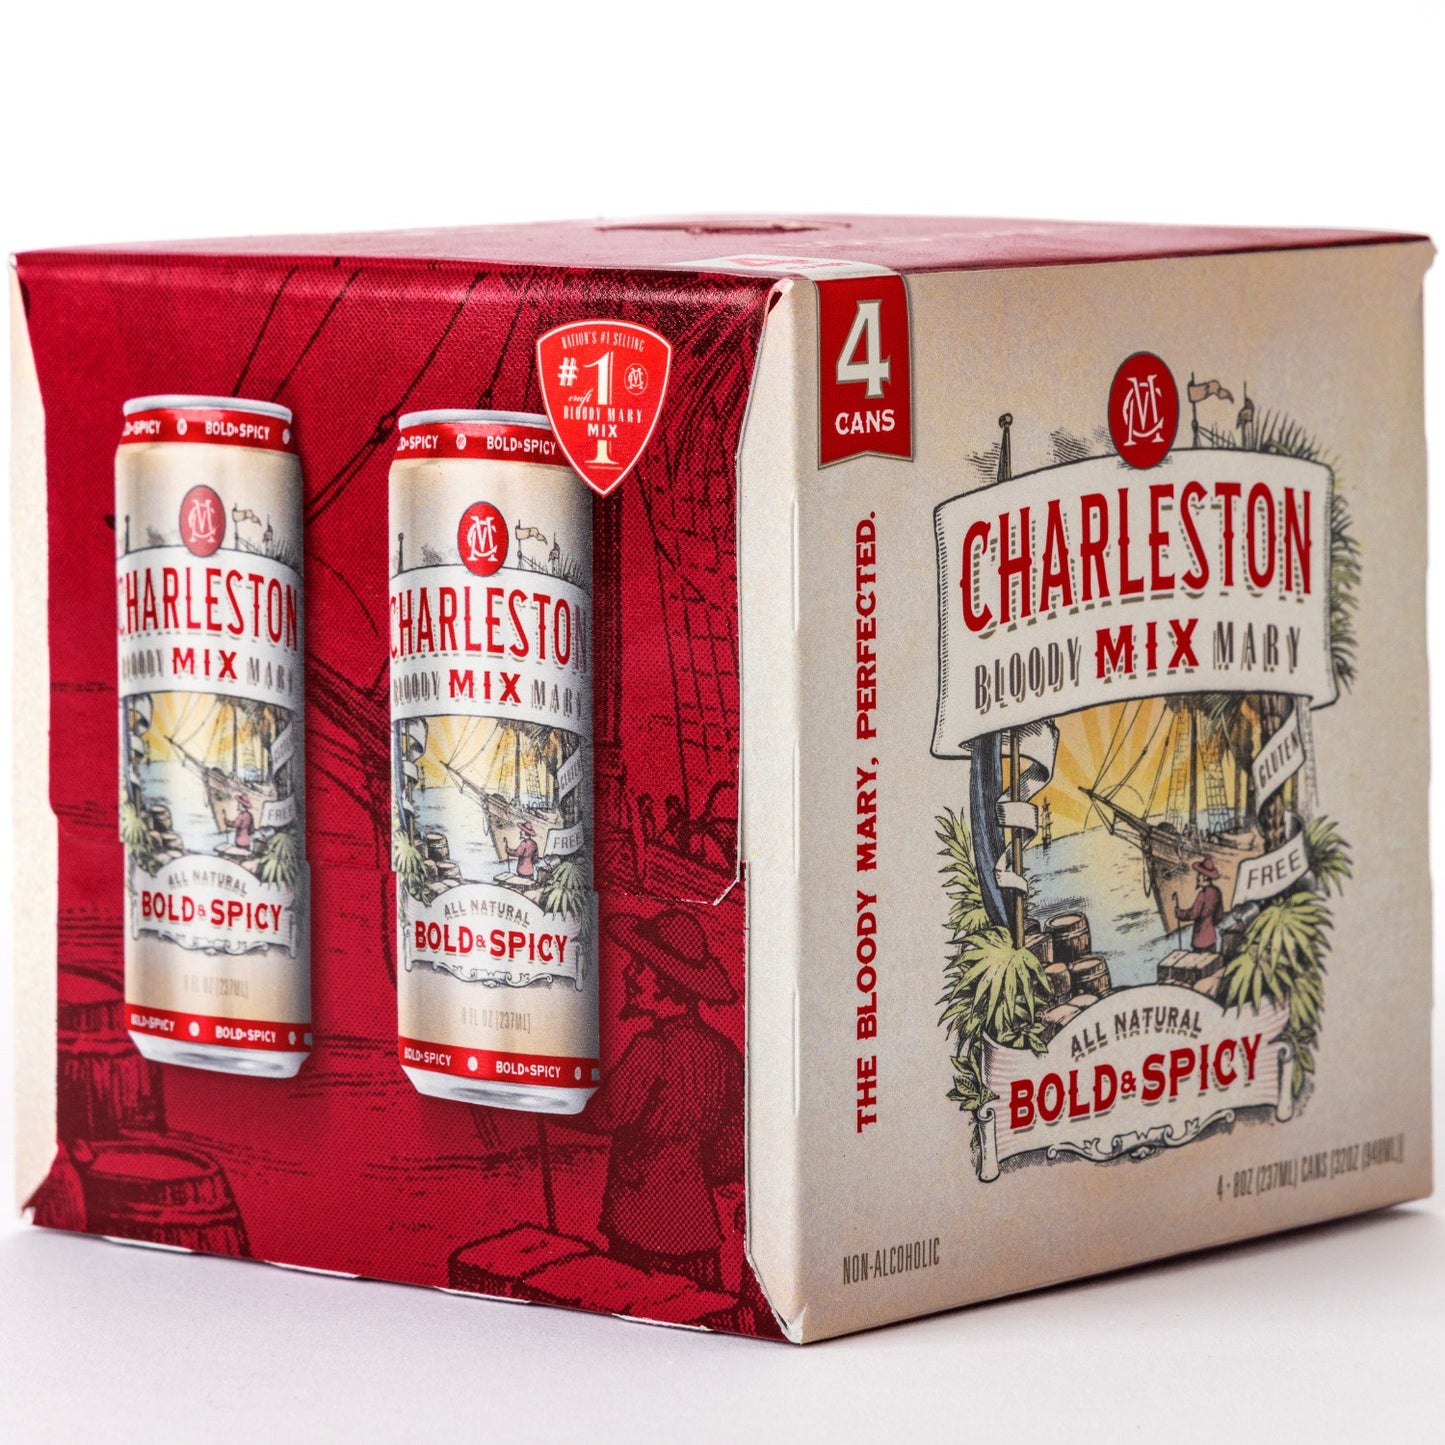 Charleston Mix Bloody Mary Cocktail Mix, 4-Pack, Bold & Spicy, 8 Fl Oz, 4-Pack Can